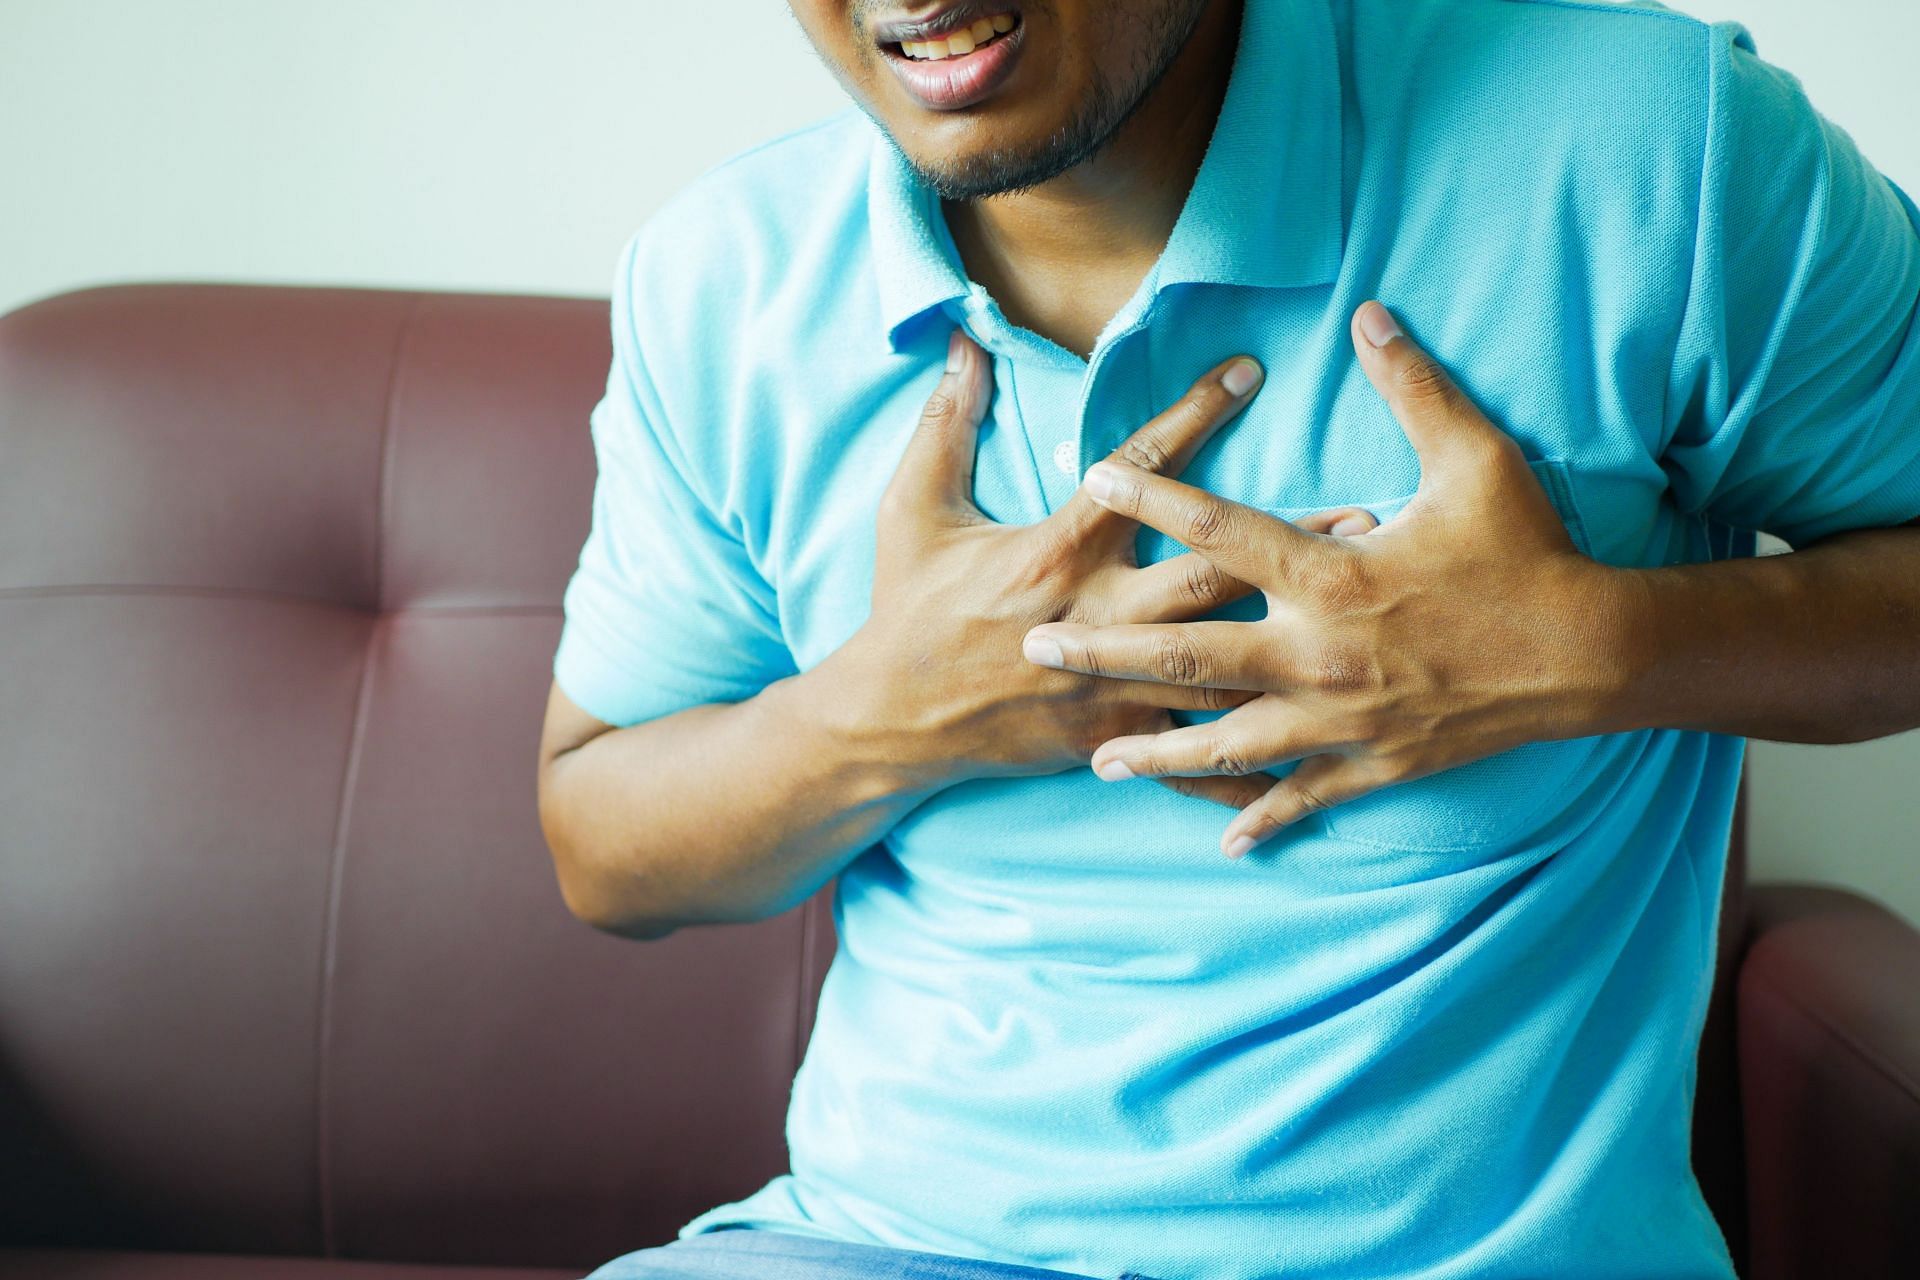 why there is chest tightness after eating? (Image via pexels / towfiqu barbhuiya)